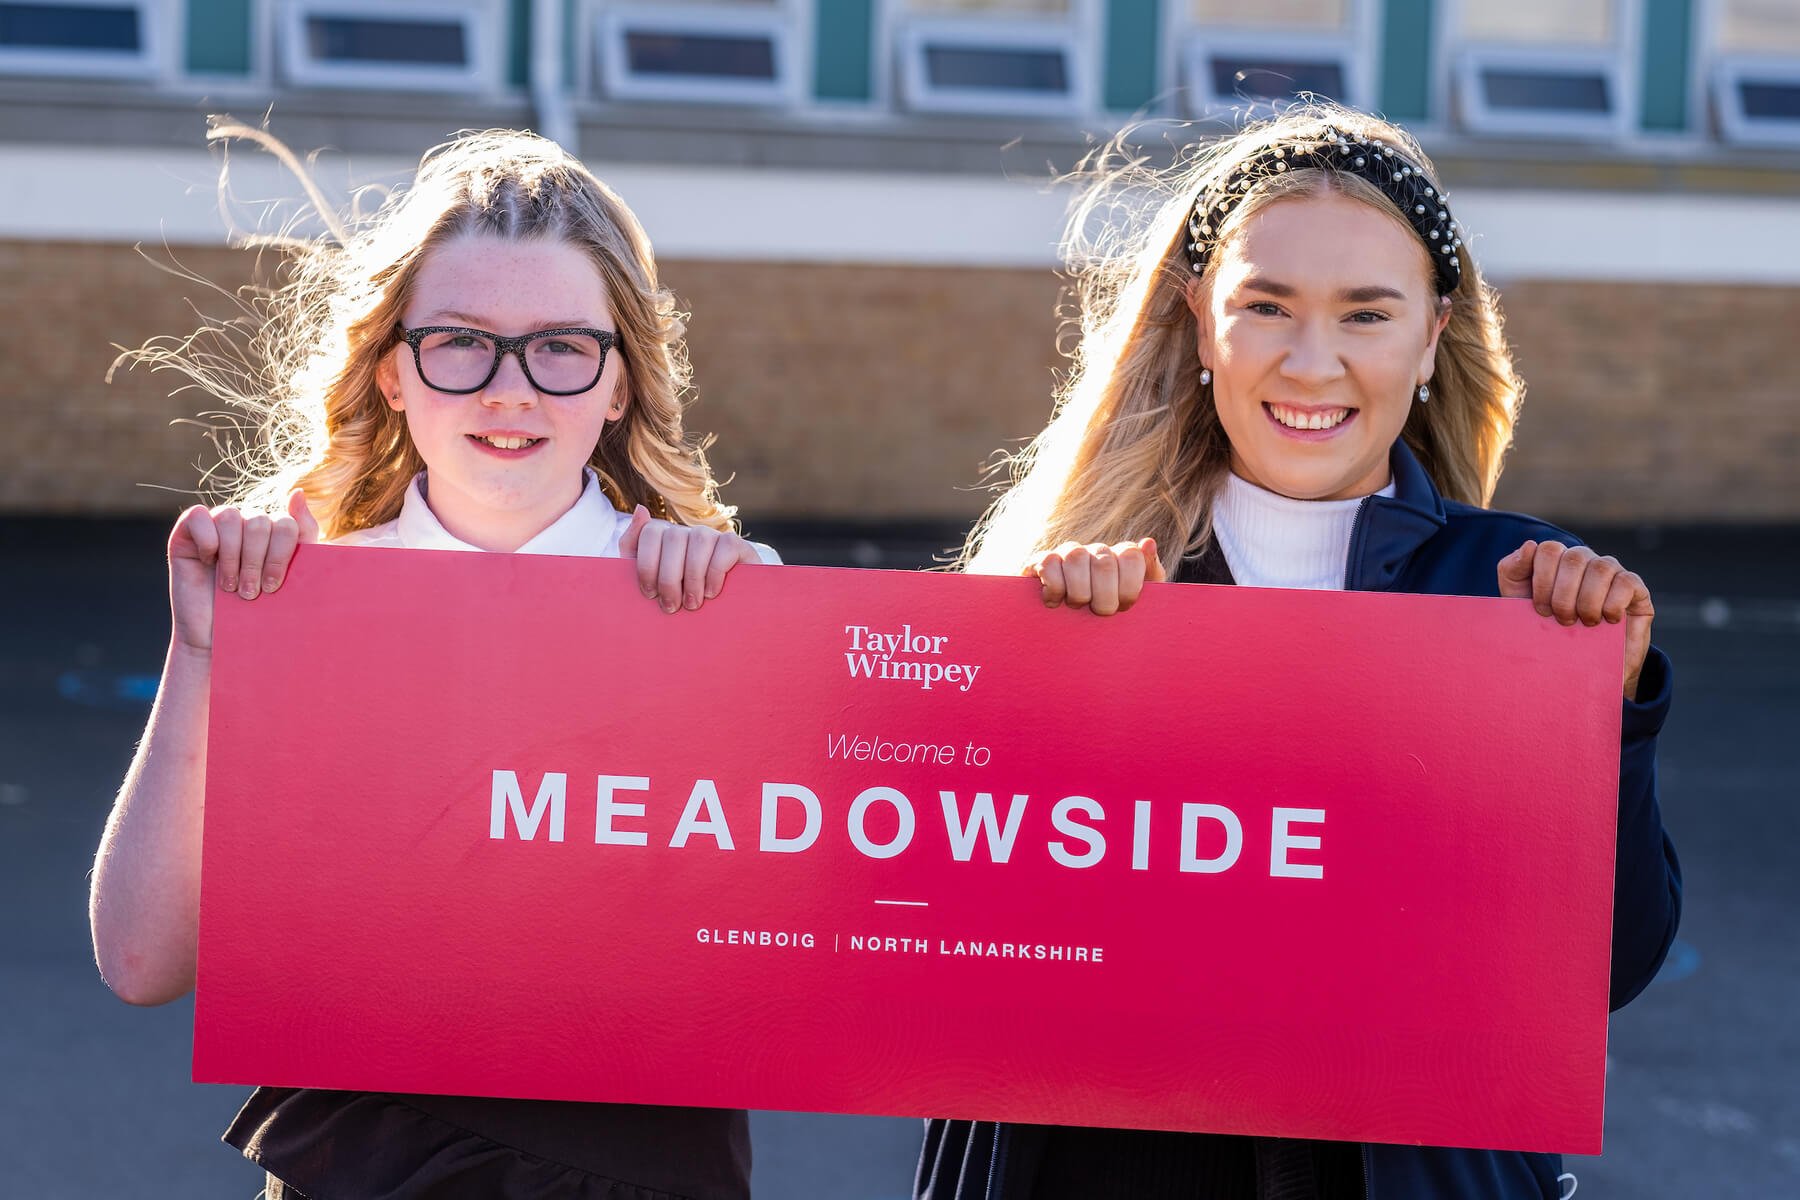 Glenboig naming competition Meadowside